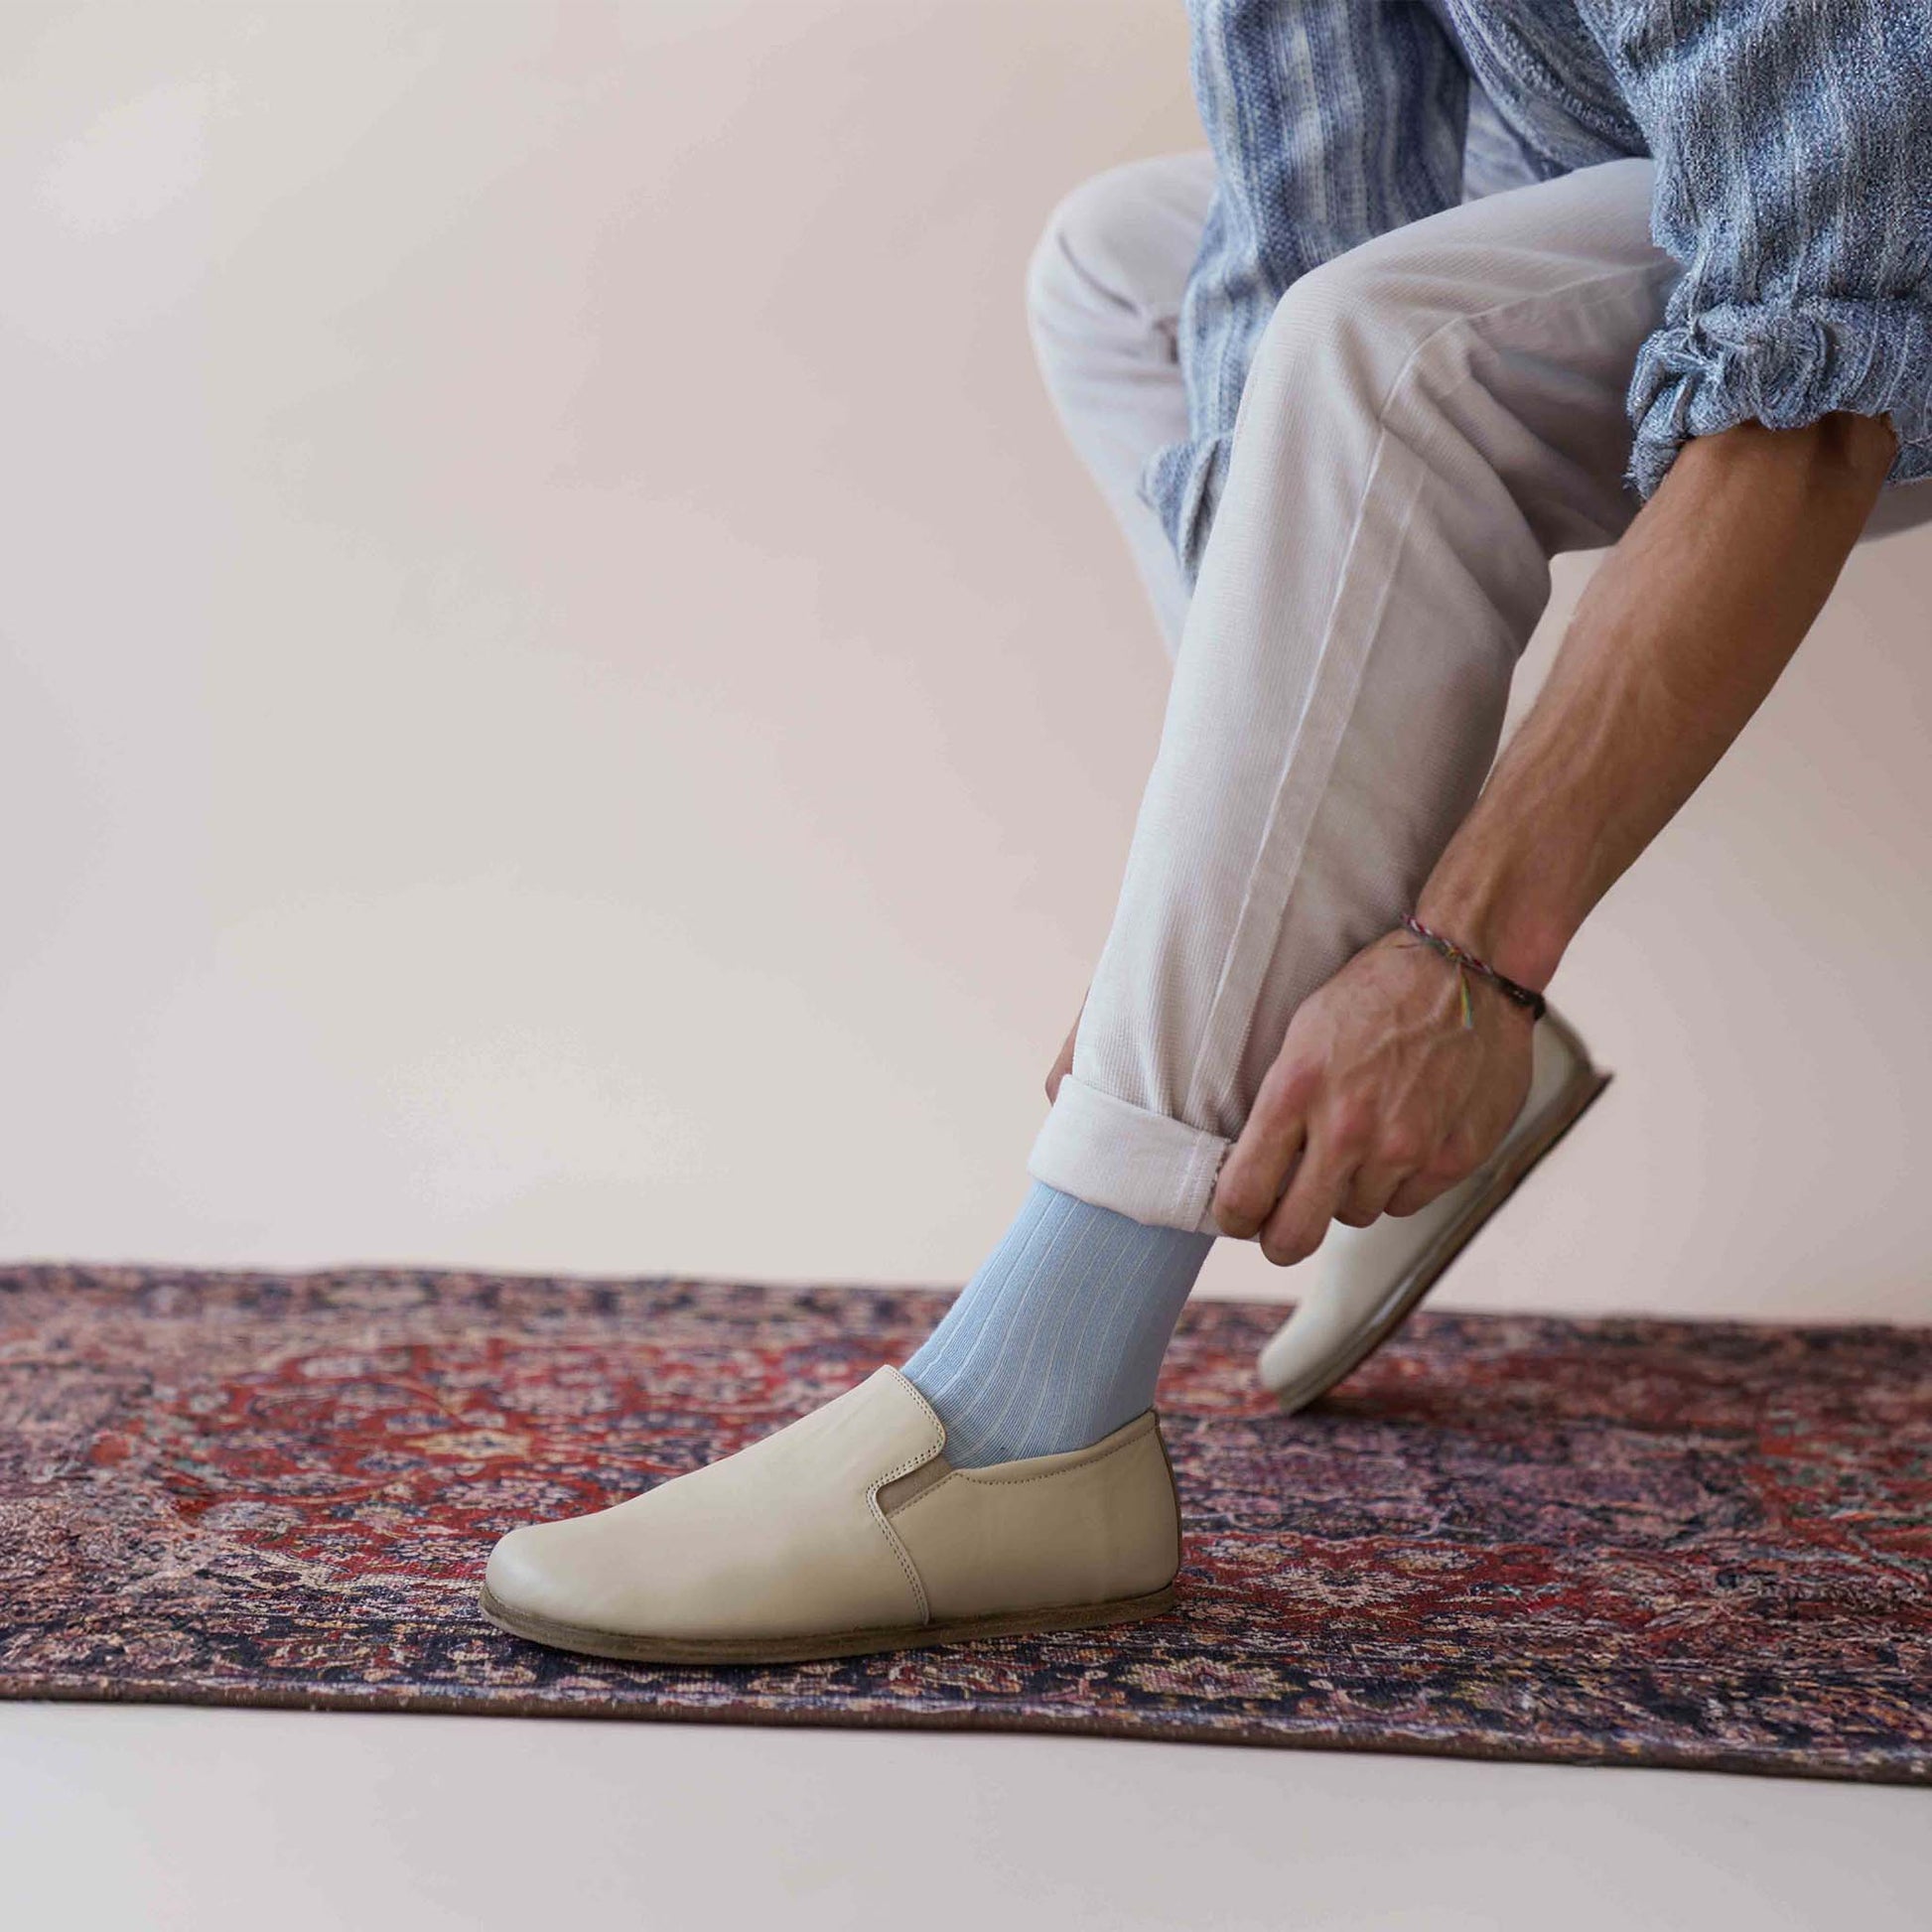 Model adjusting pants while wearing Ionia Leather Barefoot Men Loafers in beige, emphasizing the casual and comfortable fit.